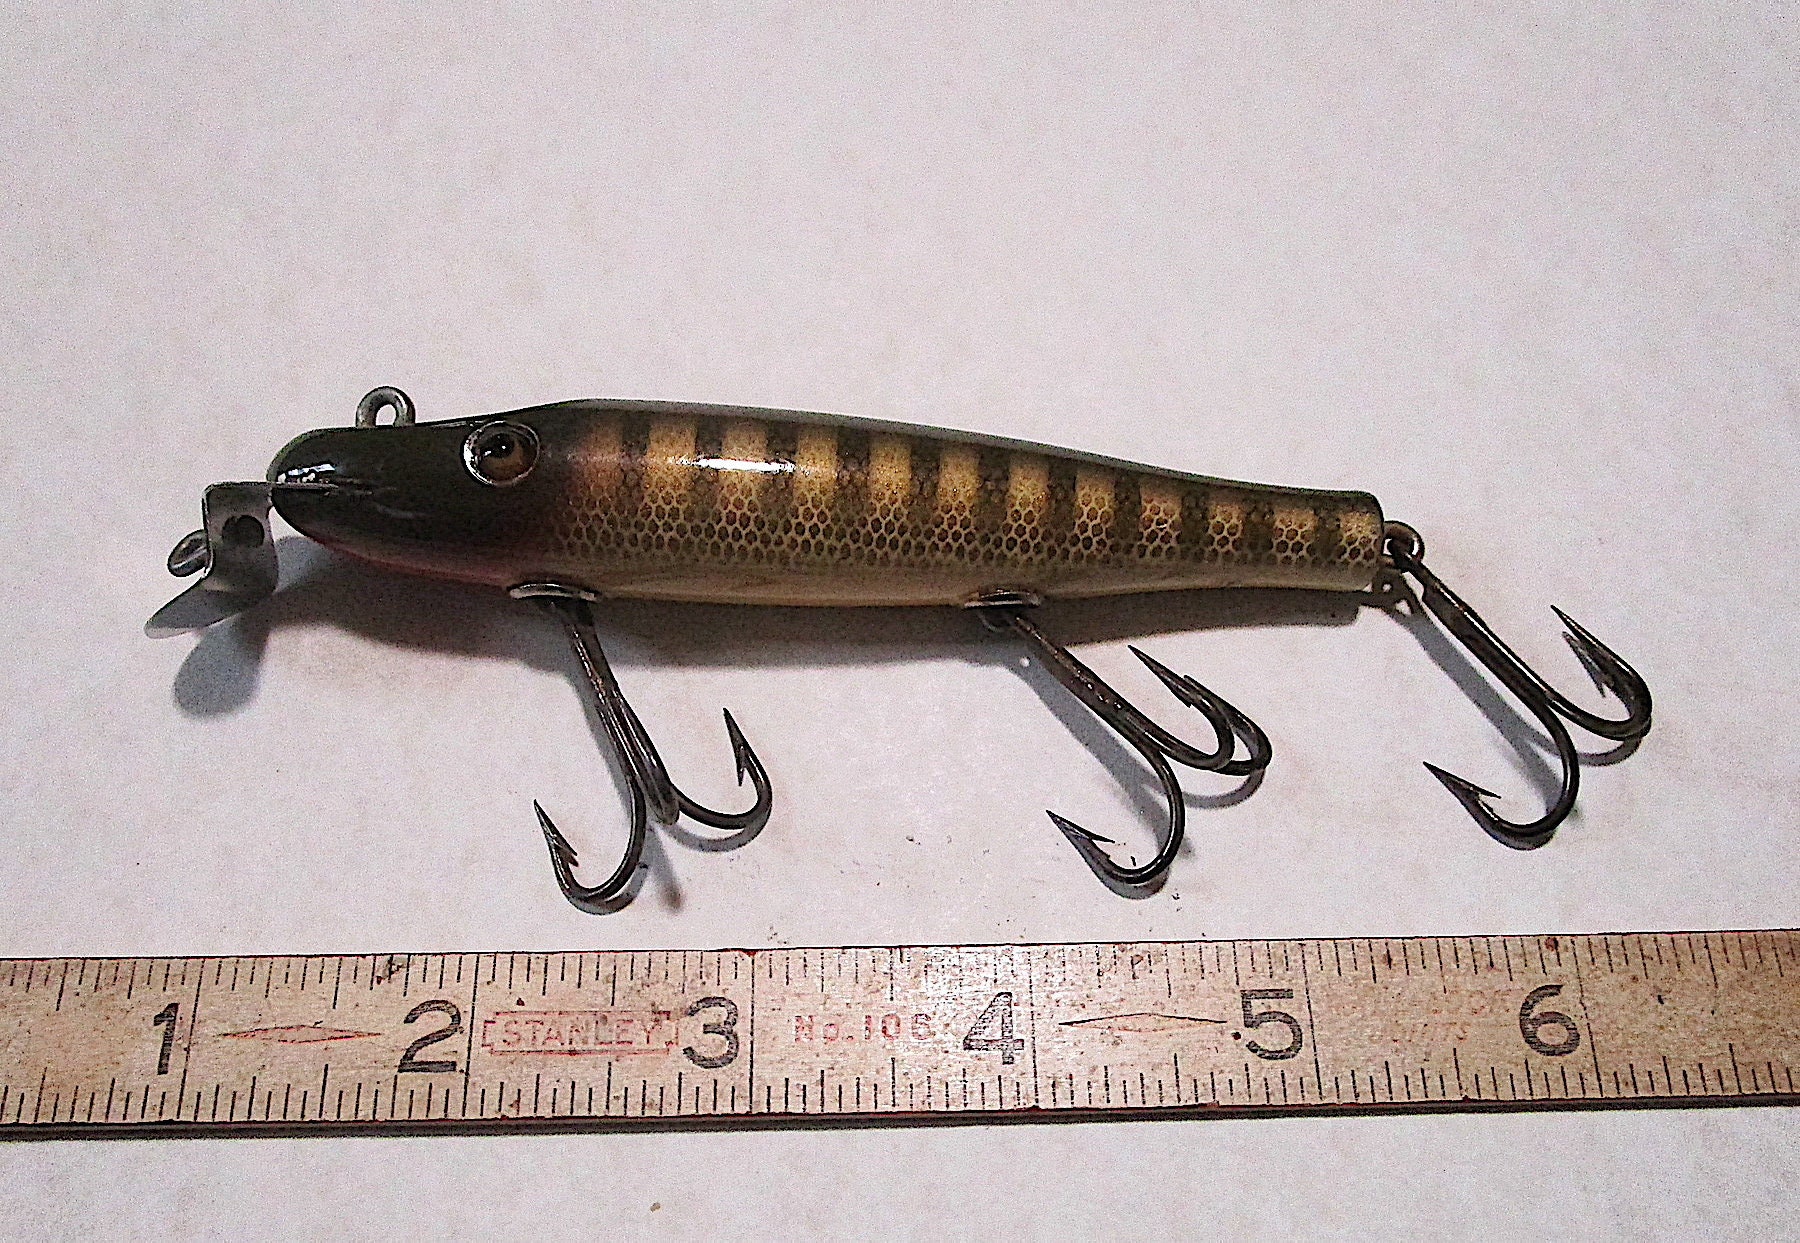 BR38 Old 2LT Creek Chub 700 Pikie Minnow Fish Lure in Pike Scale. Vintage  Glass Eyes, 2 Line Ties, EX Condition Classic Lure 